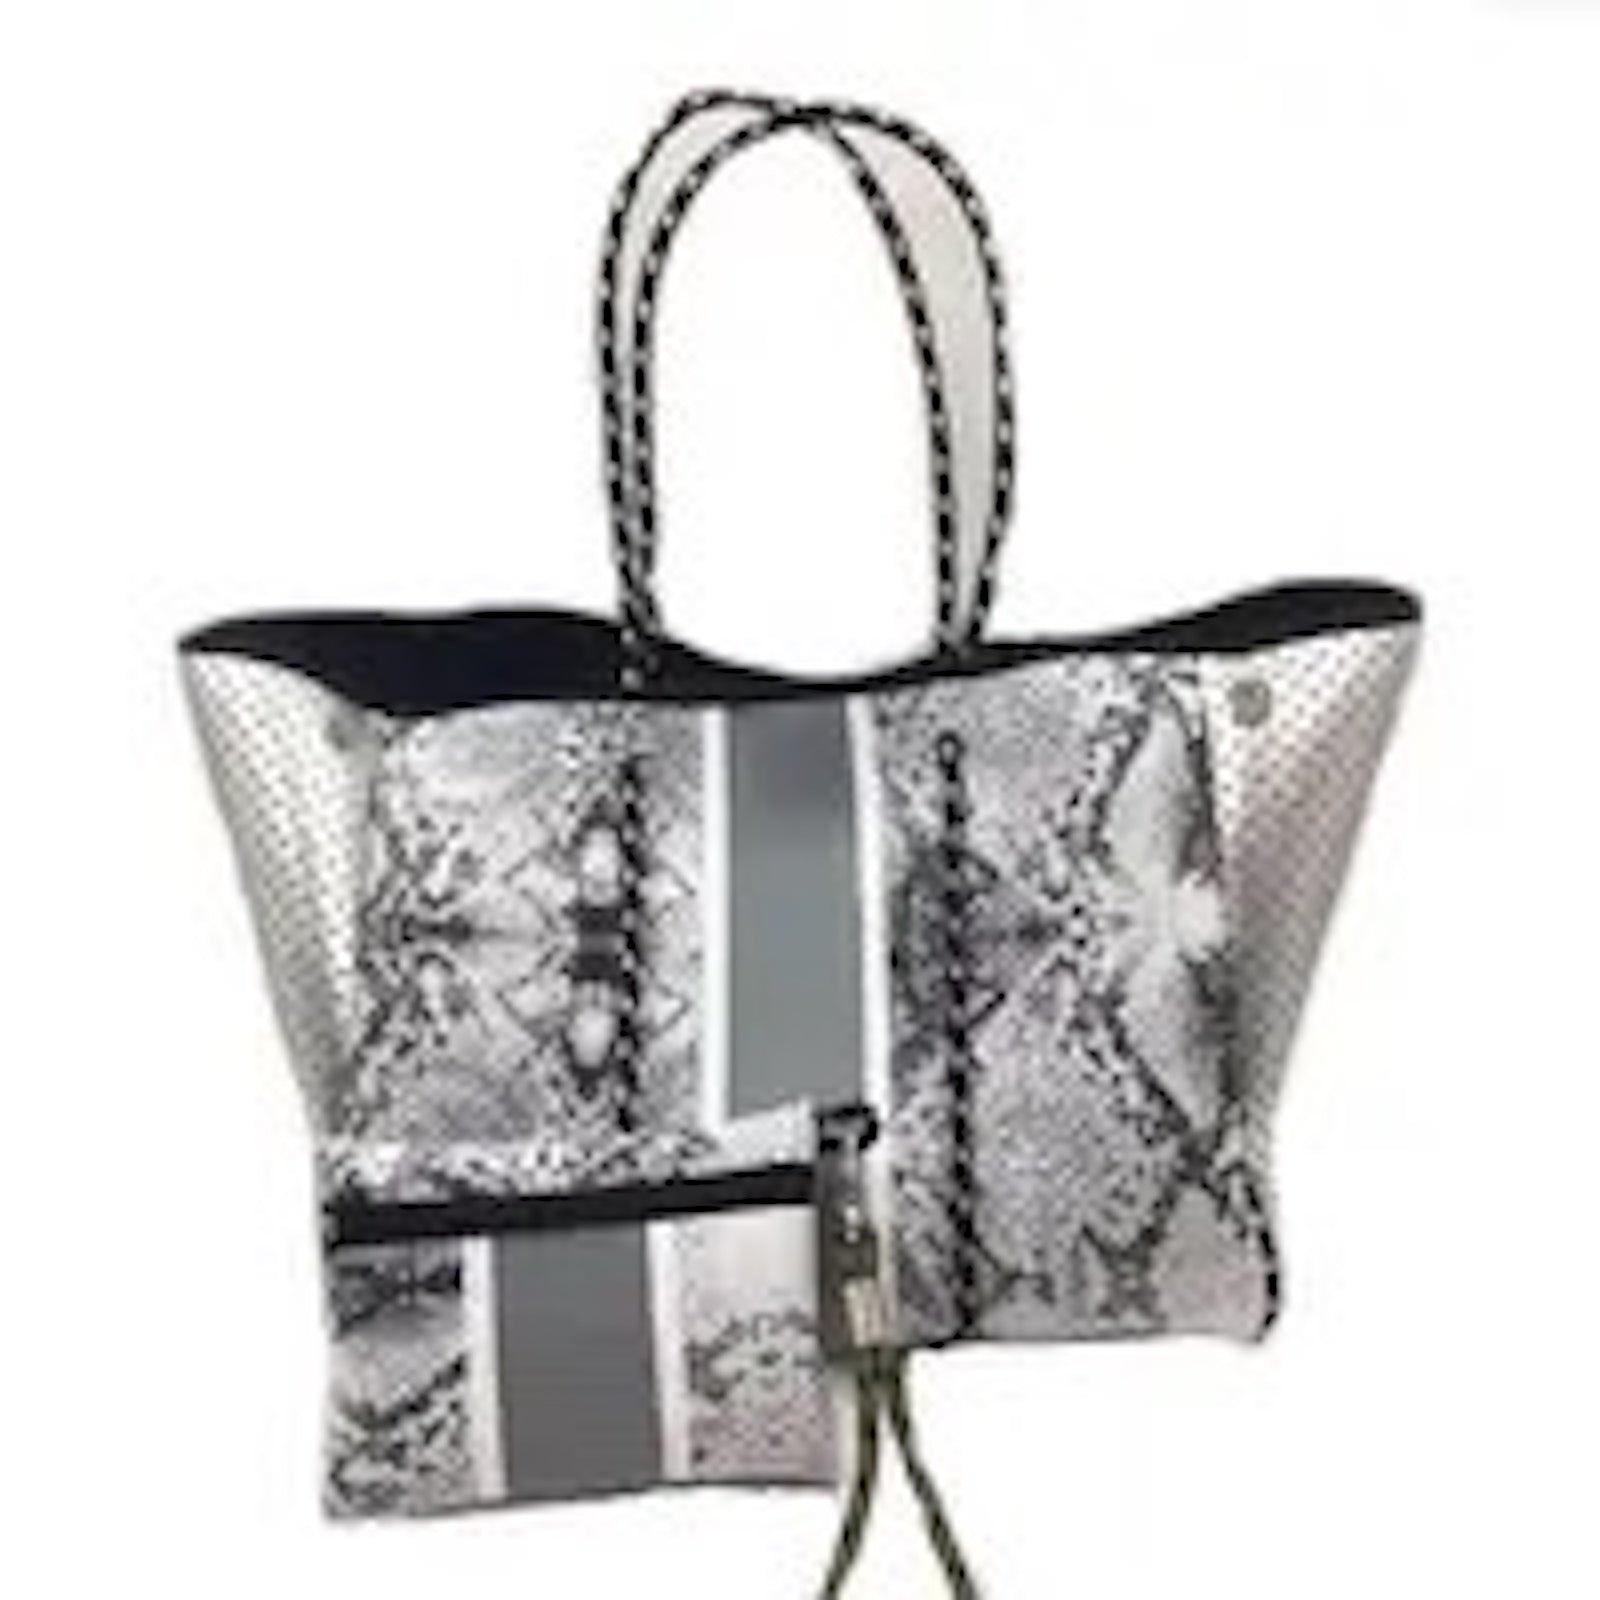 The perfect travel companion Neoprene Bag/Tote - BTK COLLECTION